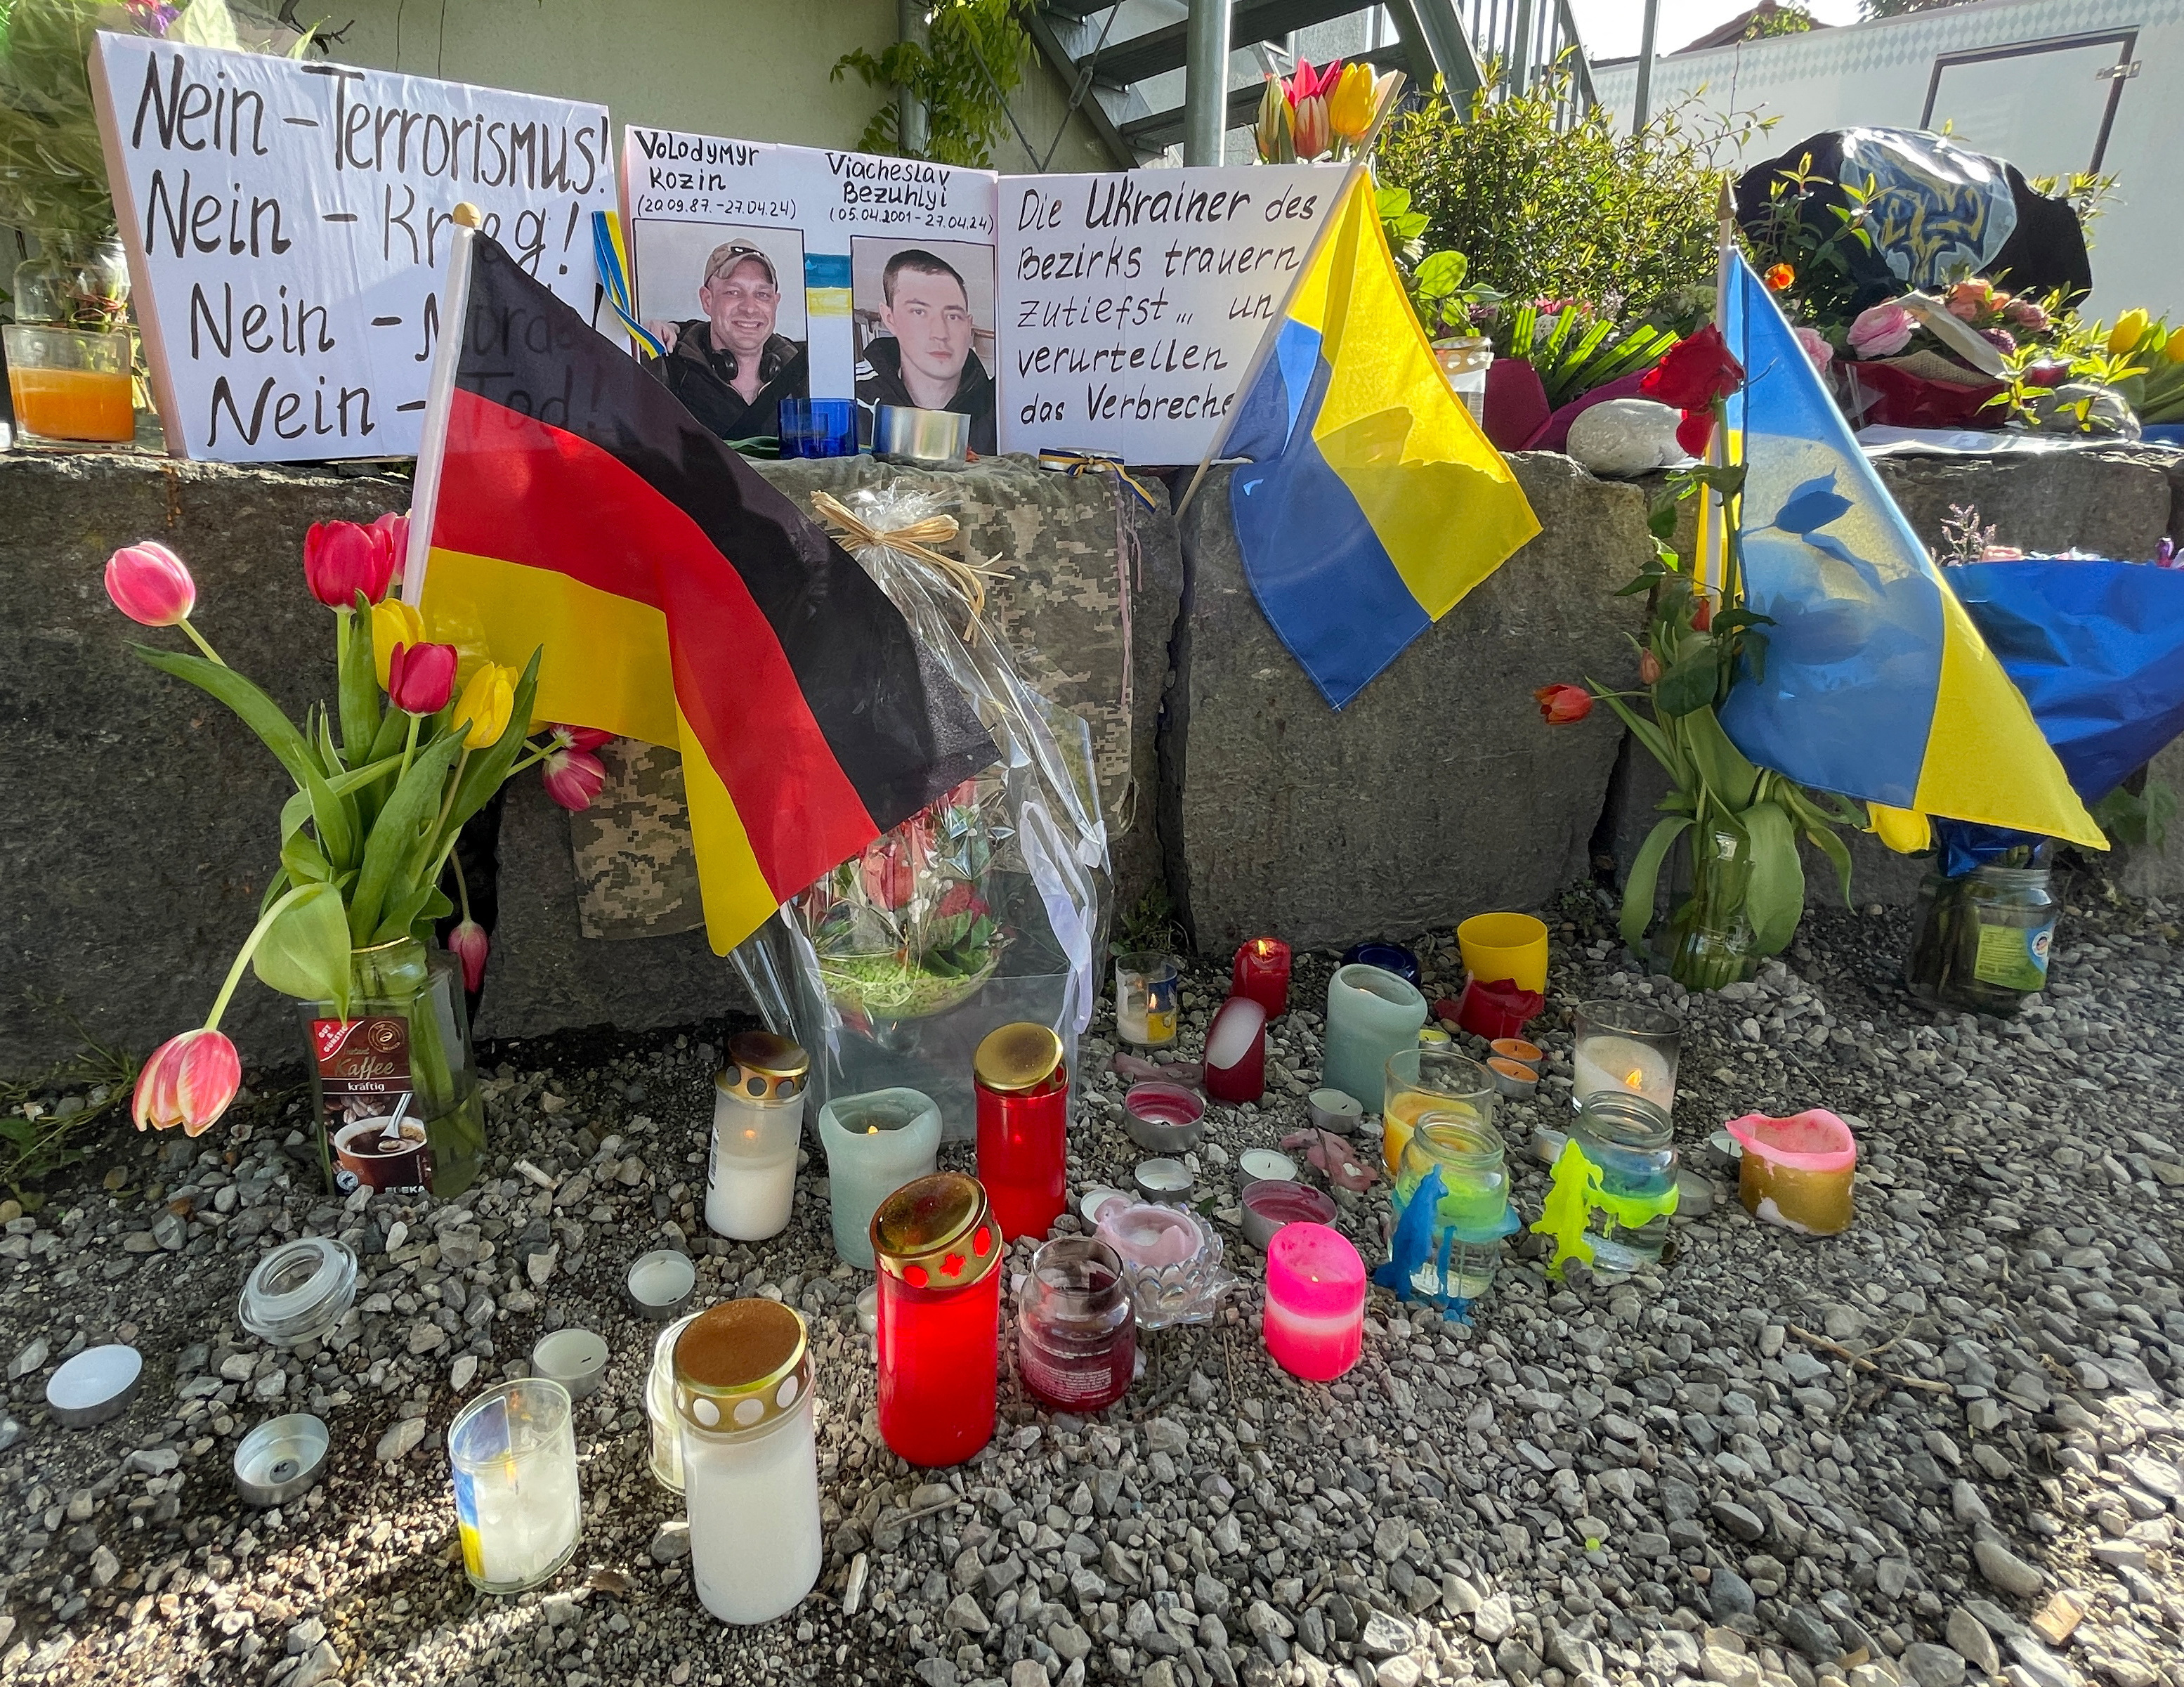 Residents mourn death of two Ukrainian soldiers allegedly killed by a Russian in German town